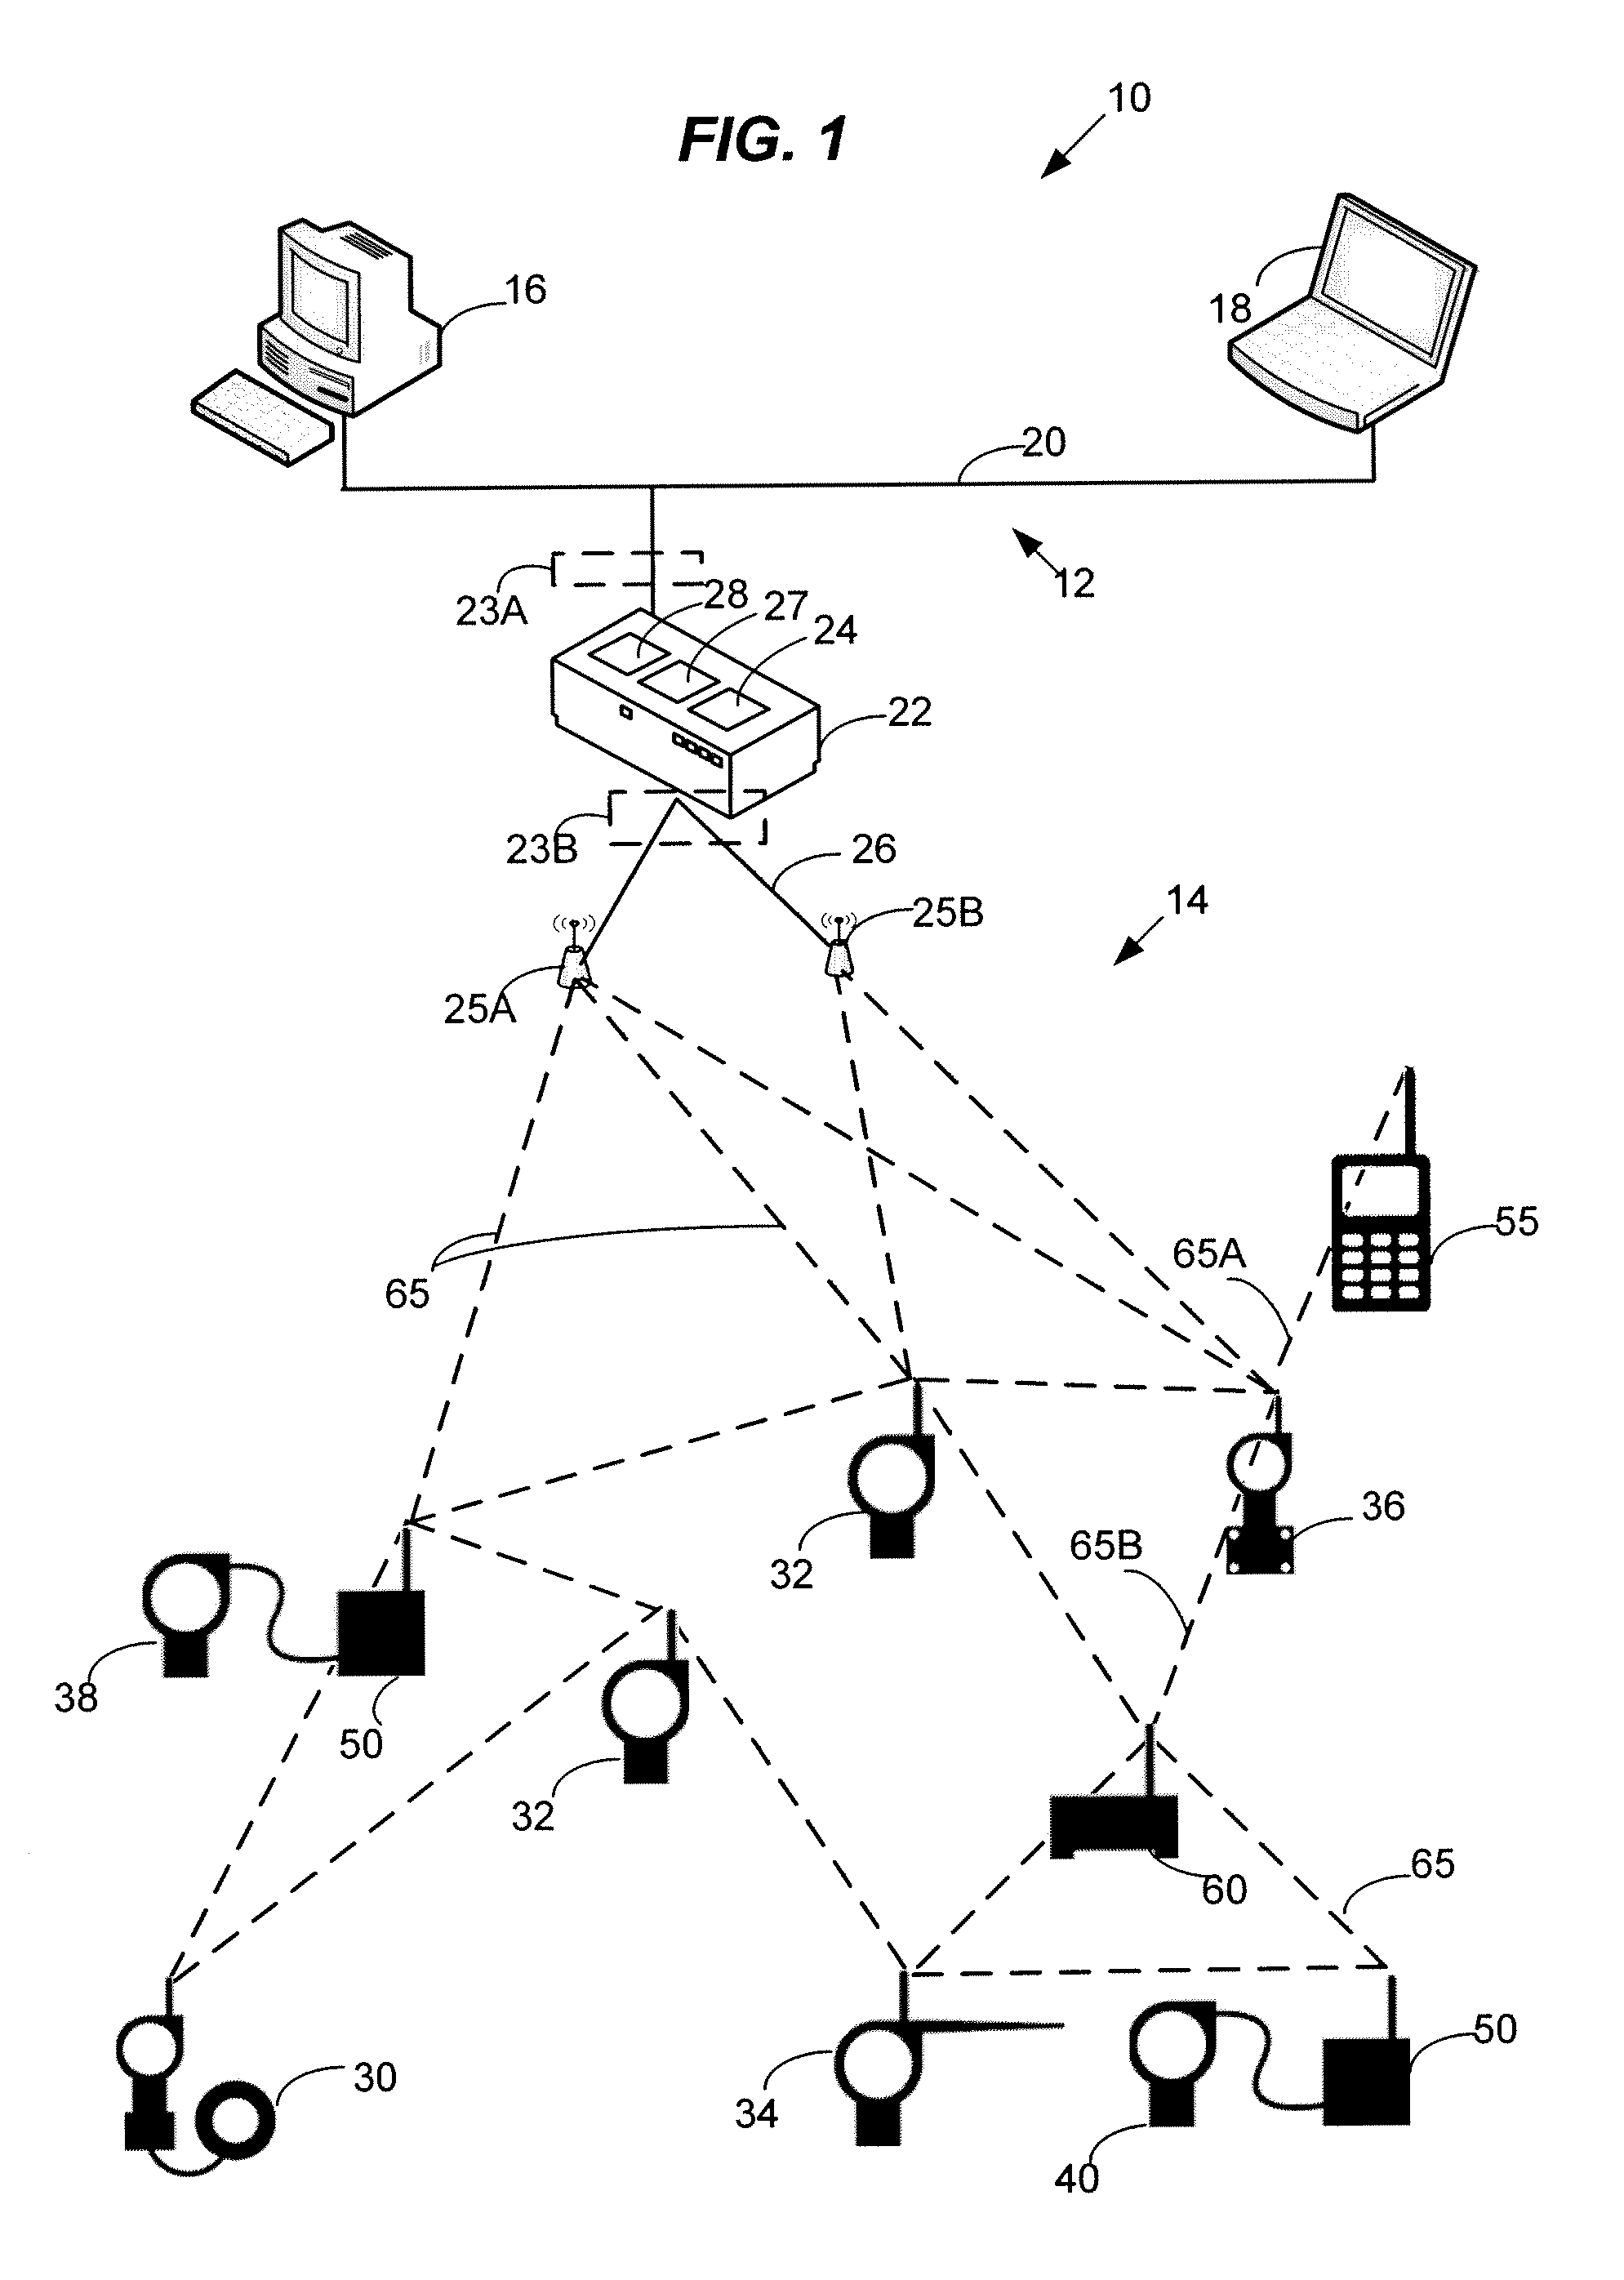 Combined Wired and Wireless Communications with Field Devices in a Process Control Environment